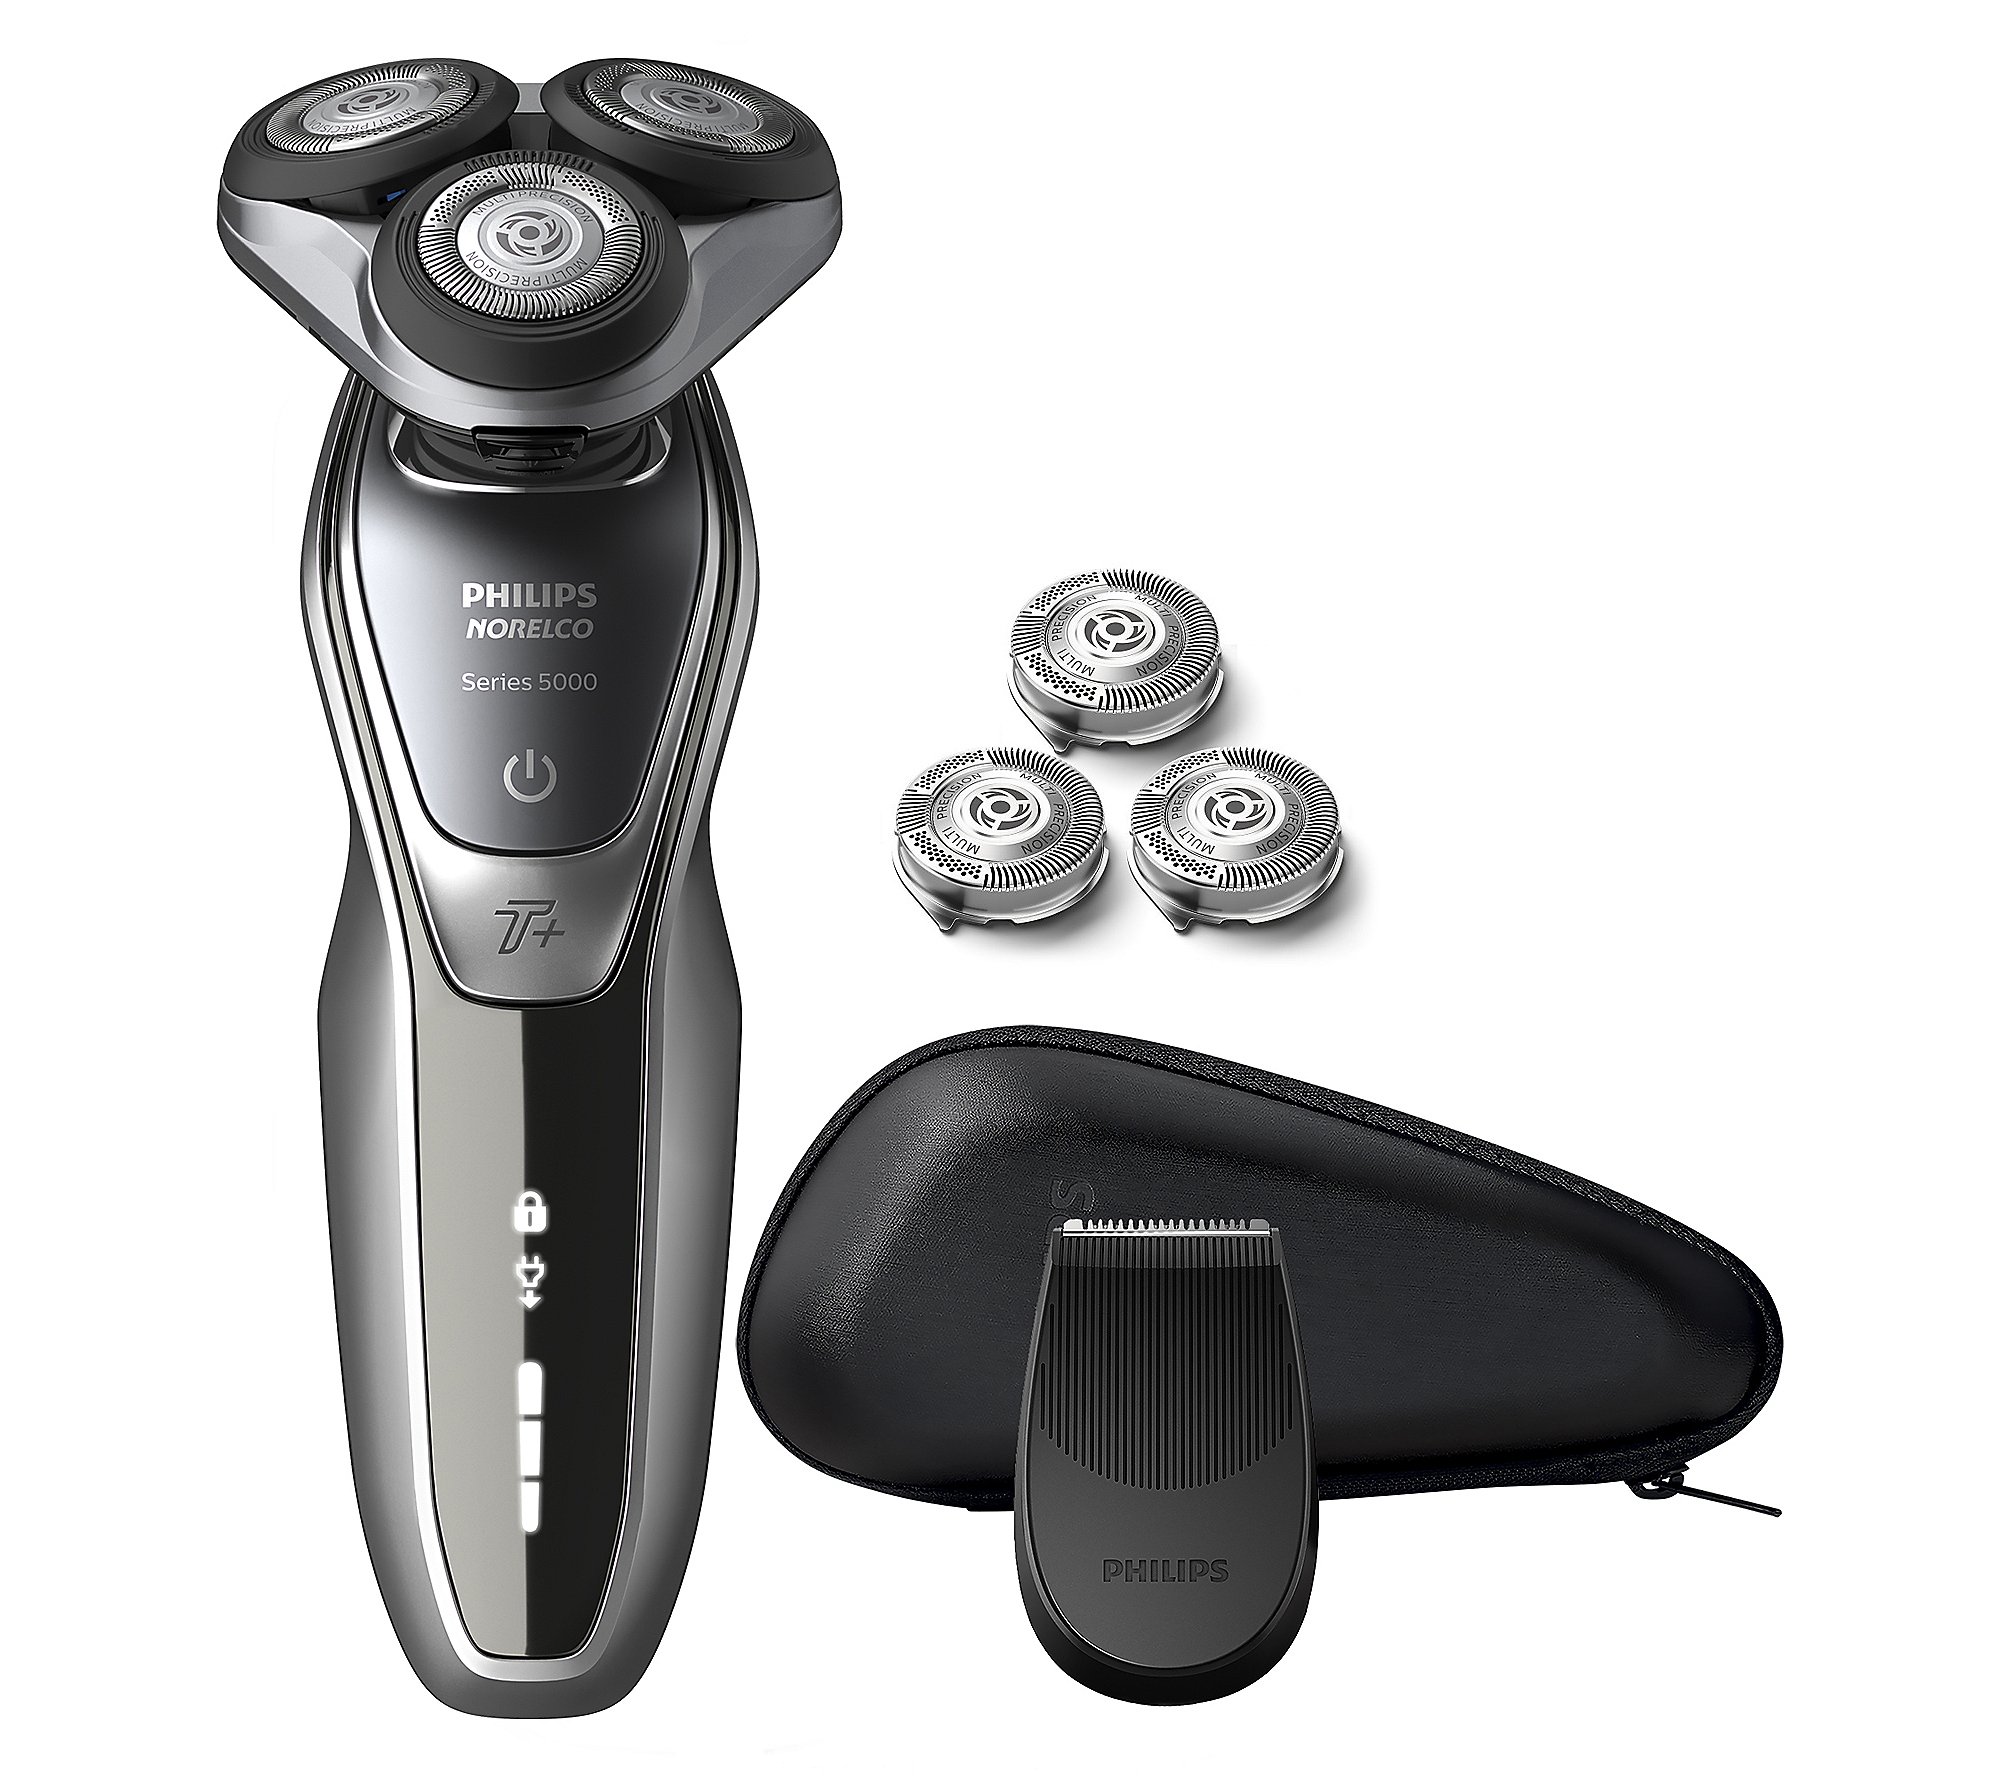 Philips Norelco 5000 Series Electric Shaver and Accessories Kit - QVC